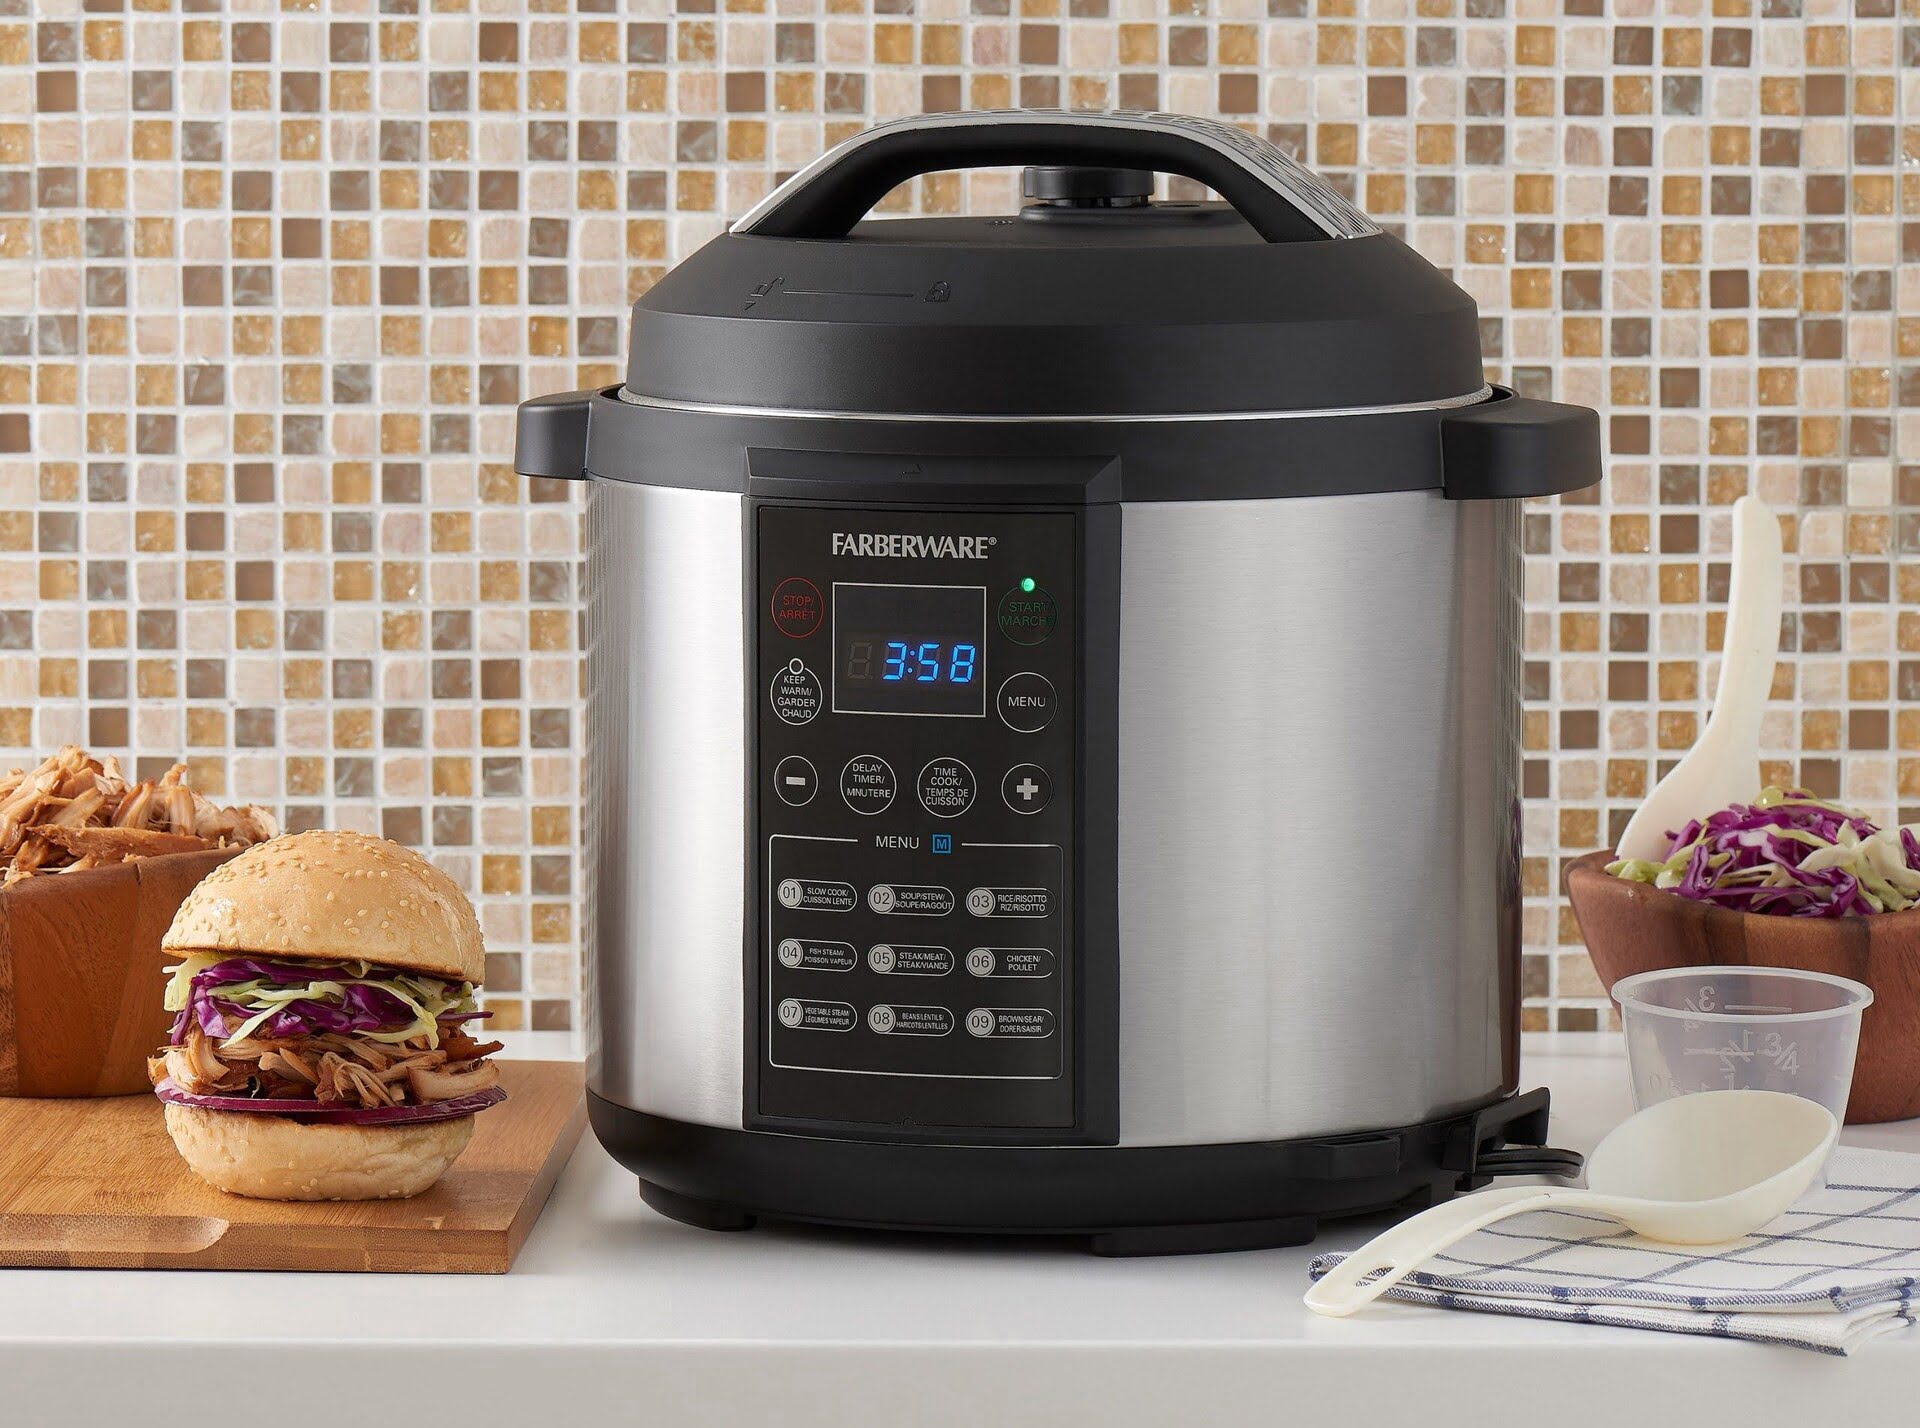 How To Use Farberware Electric Pressure Cooker